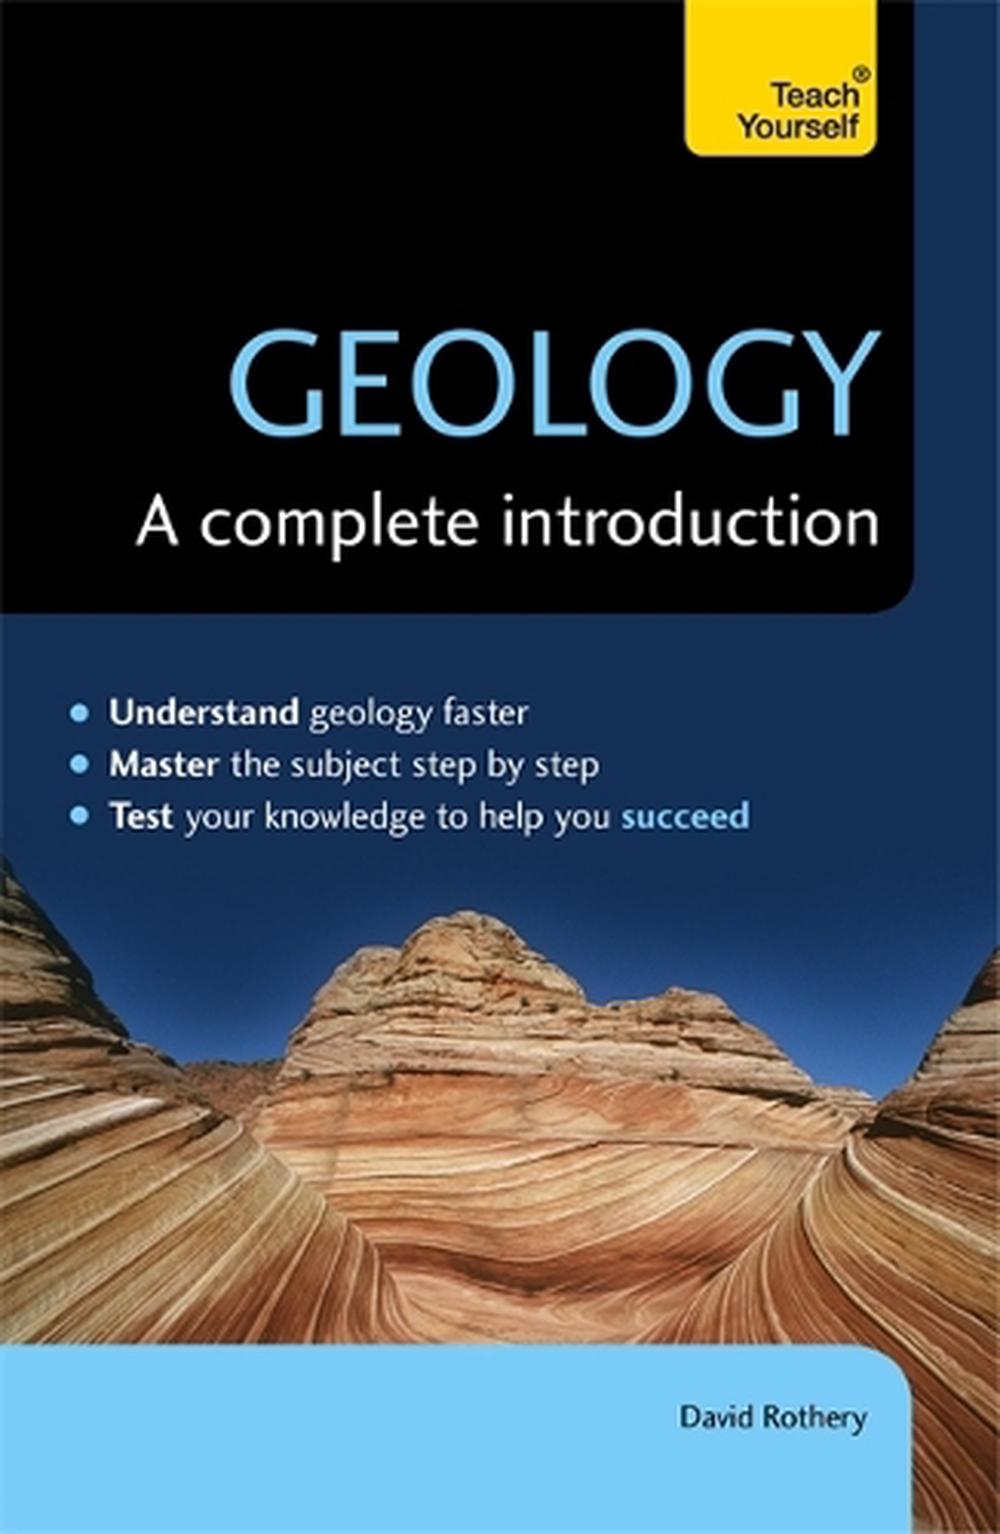 dissertation topic for geology